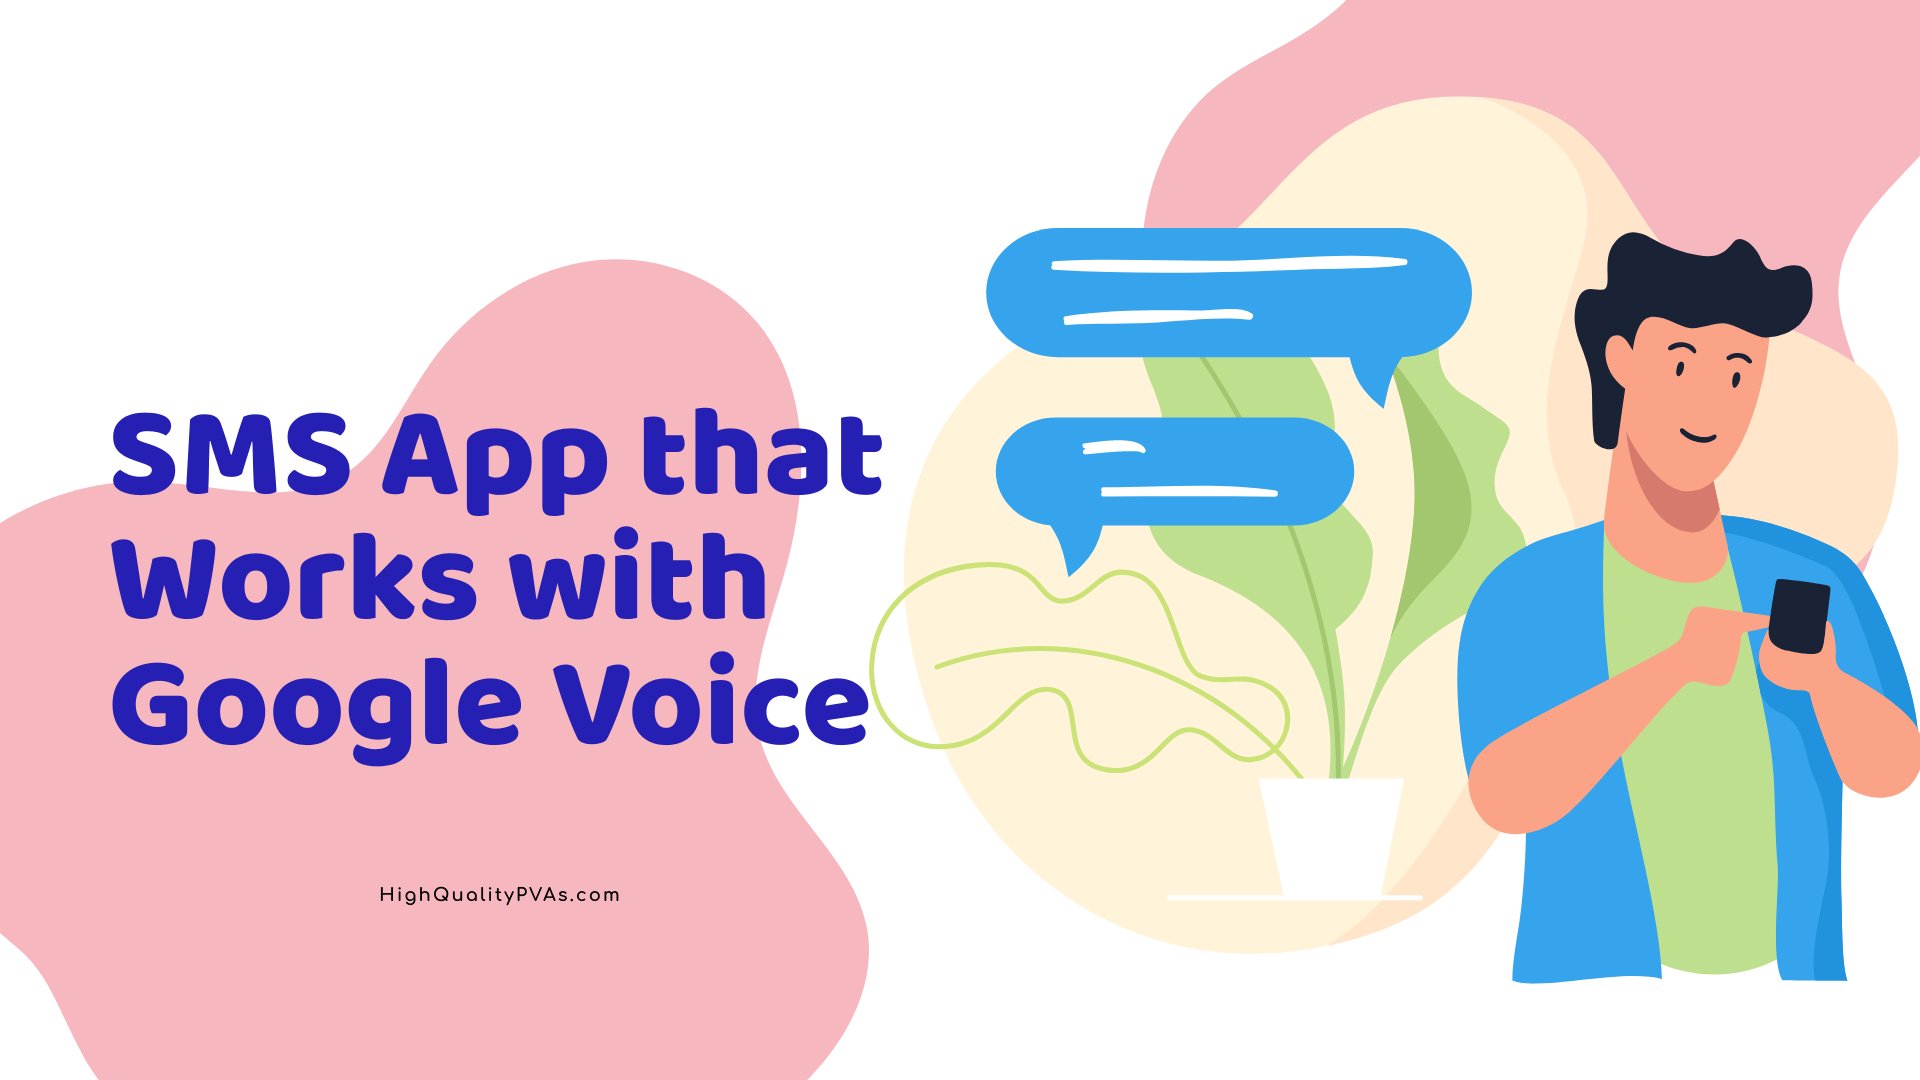 SMS App that Works with Google Voice